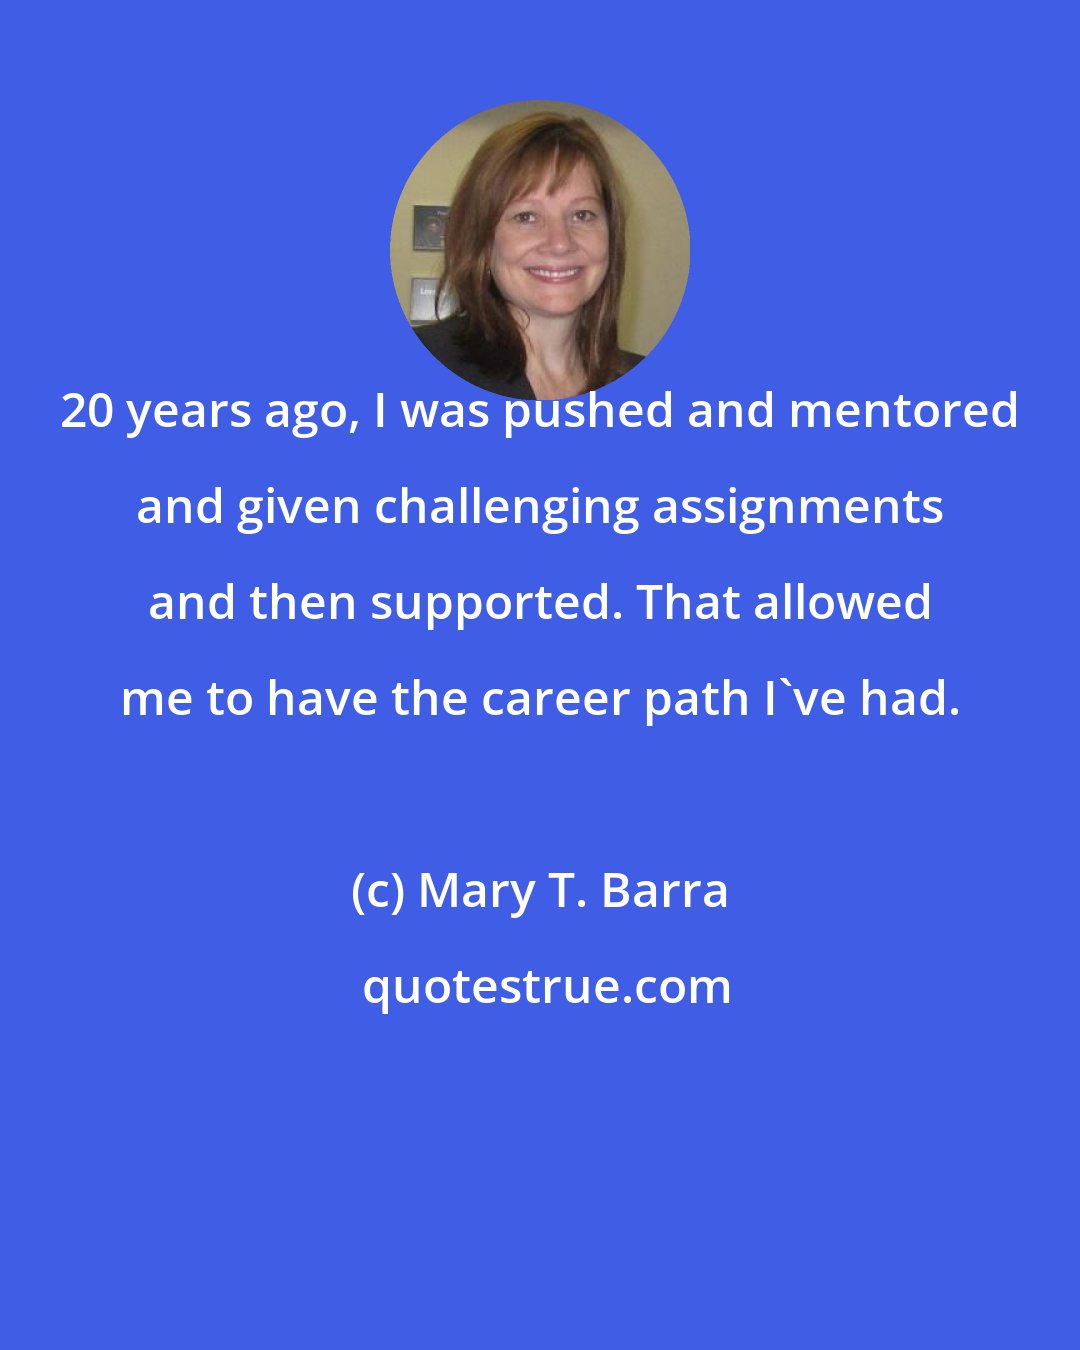 Mary T. Barra: 20 years ago, I was pushed and mentored and given challenging assignments and then supported. That allowed me to have the career path I've had.